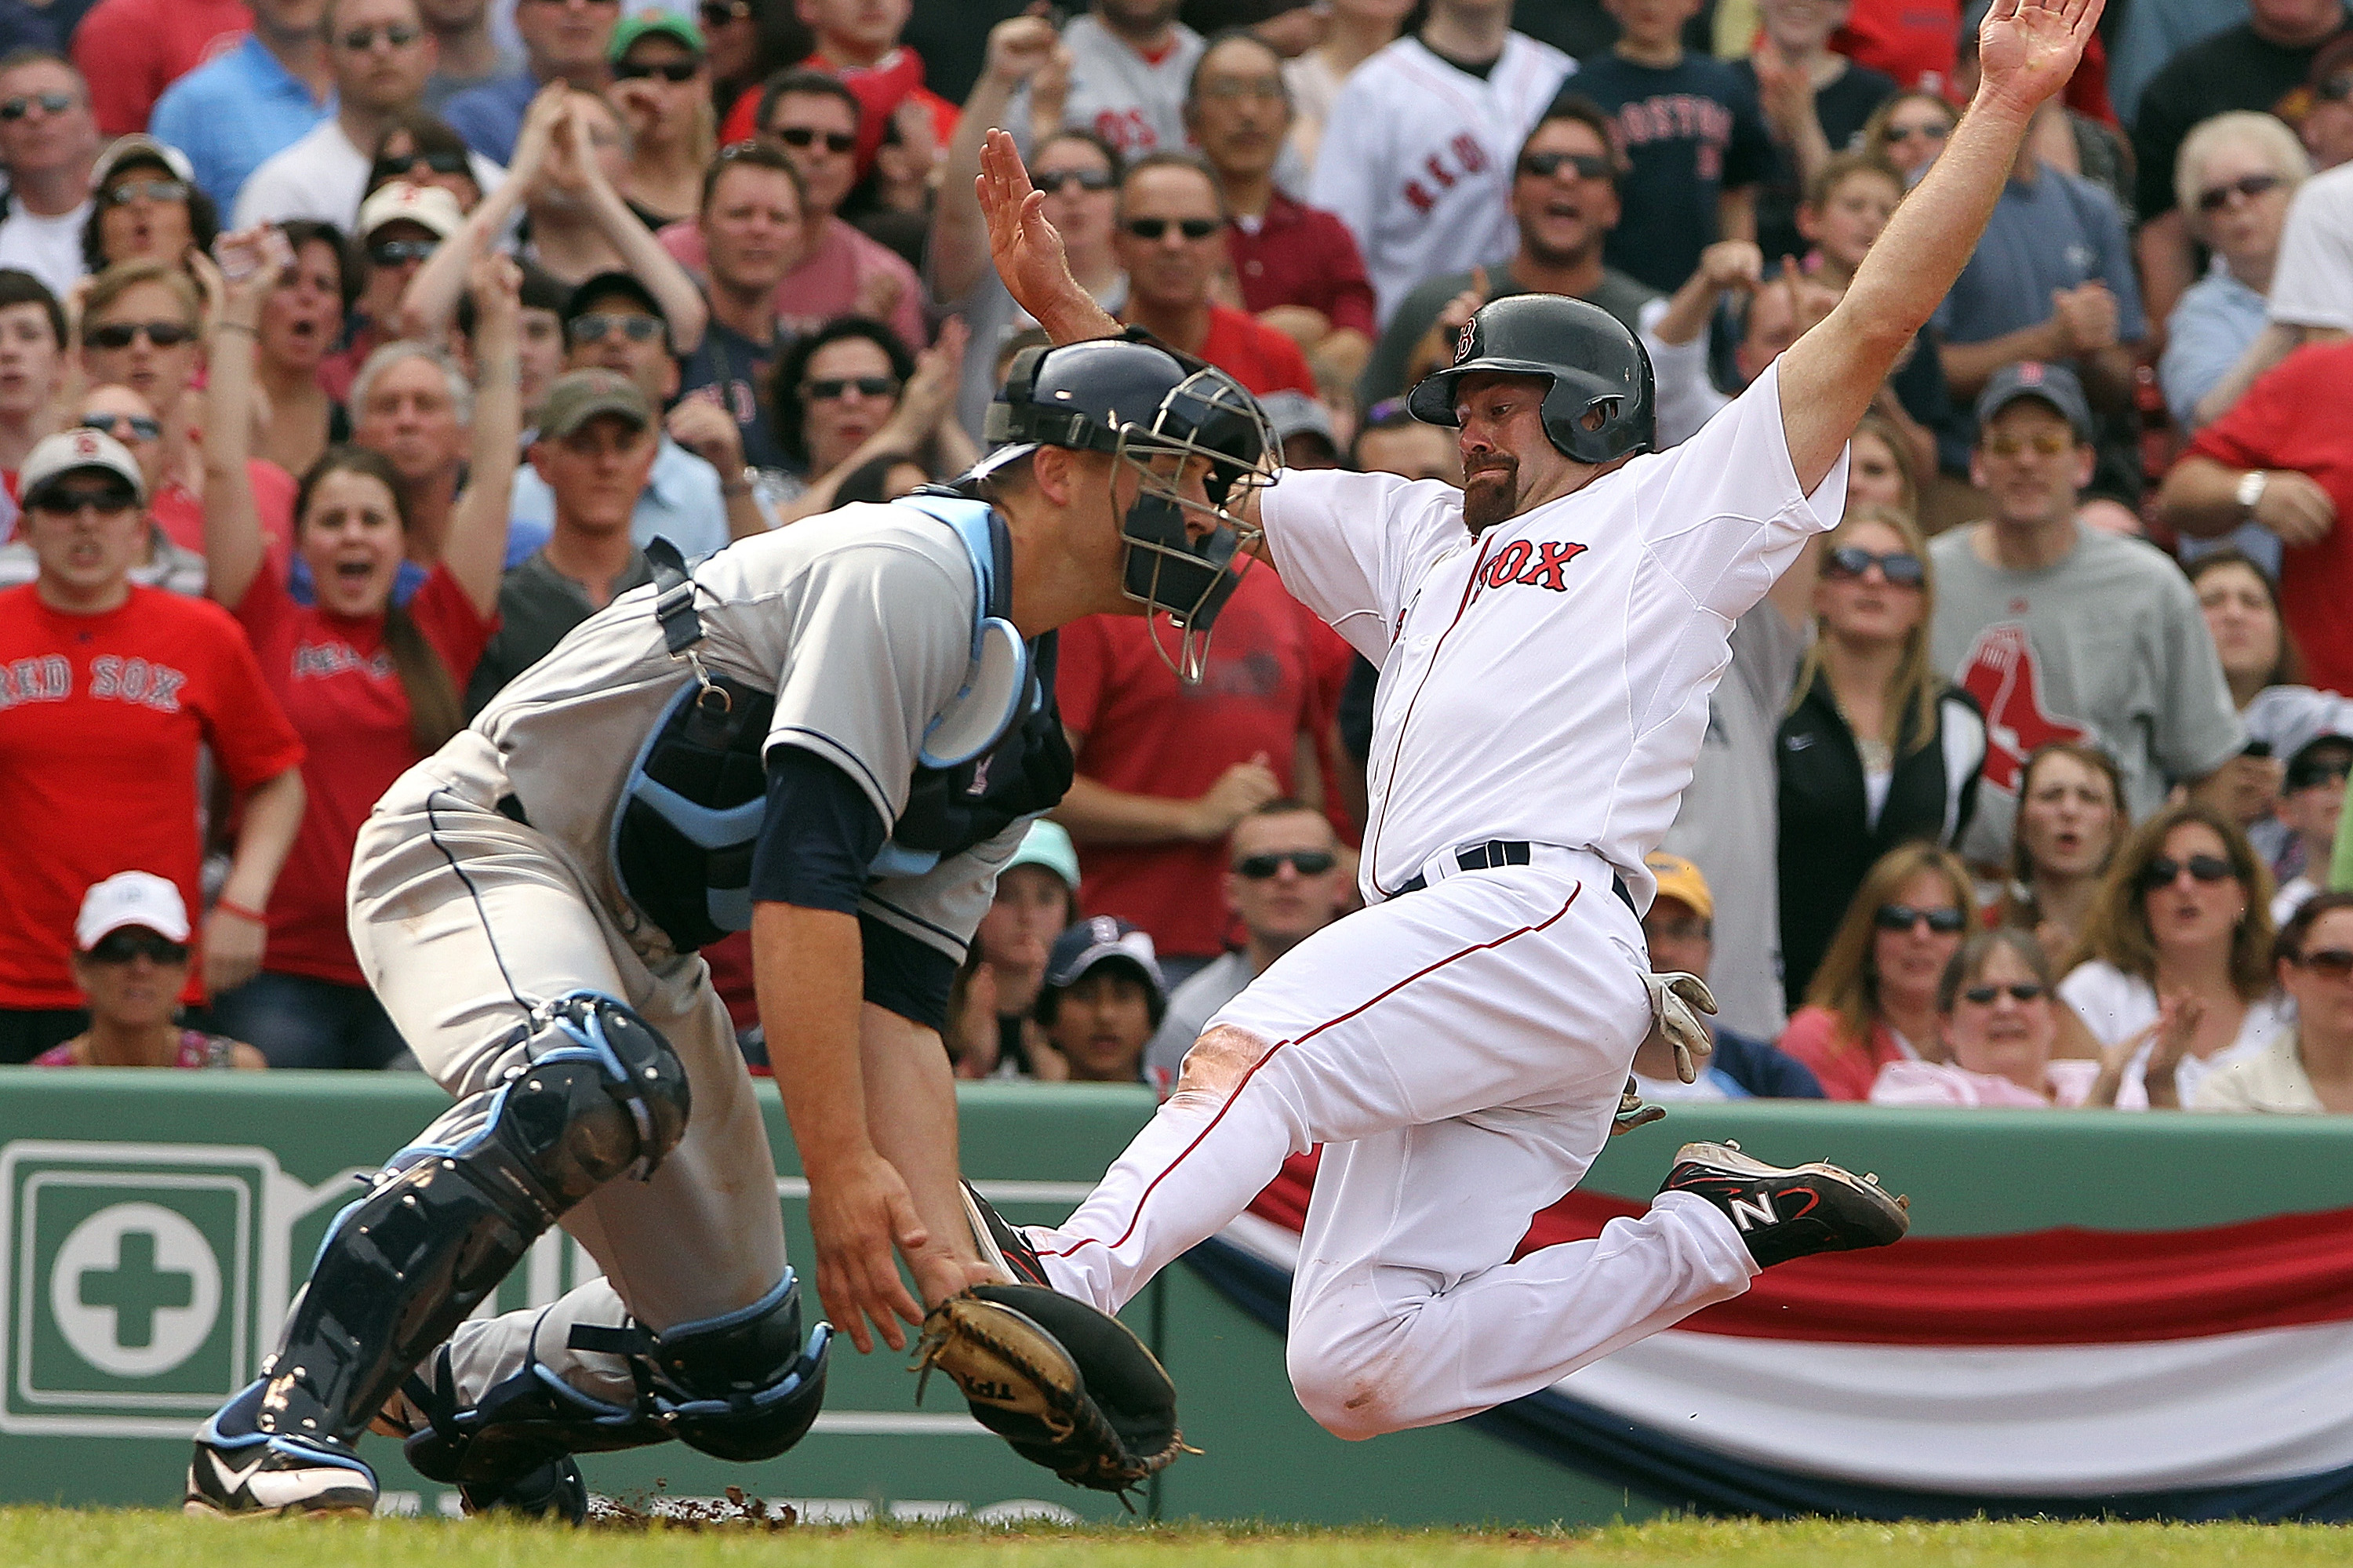 Boston Red Sox' Bobby Valentine Calls Out Kevin Youkilis, But Why